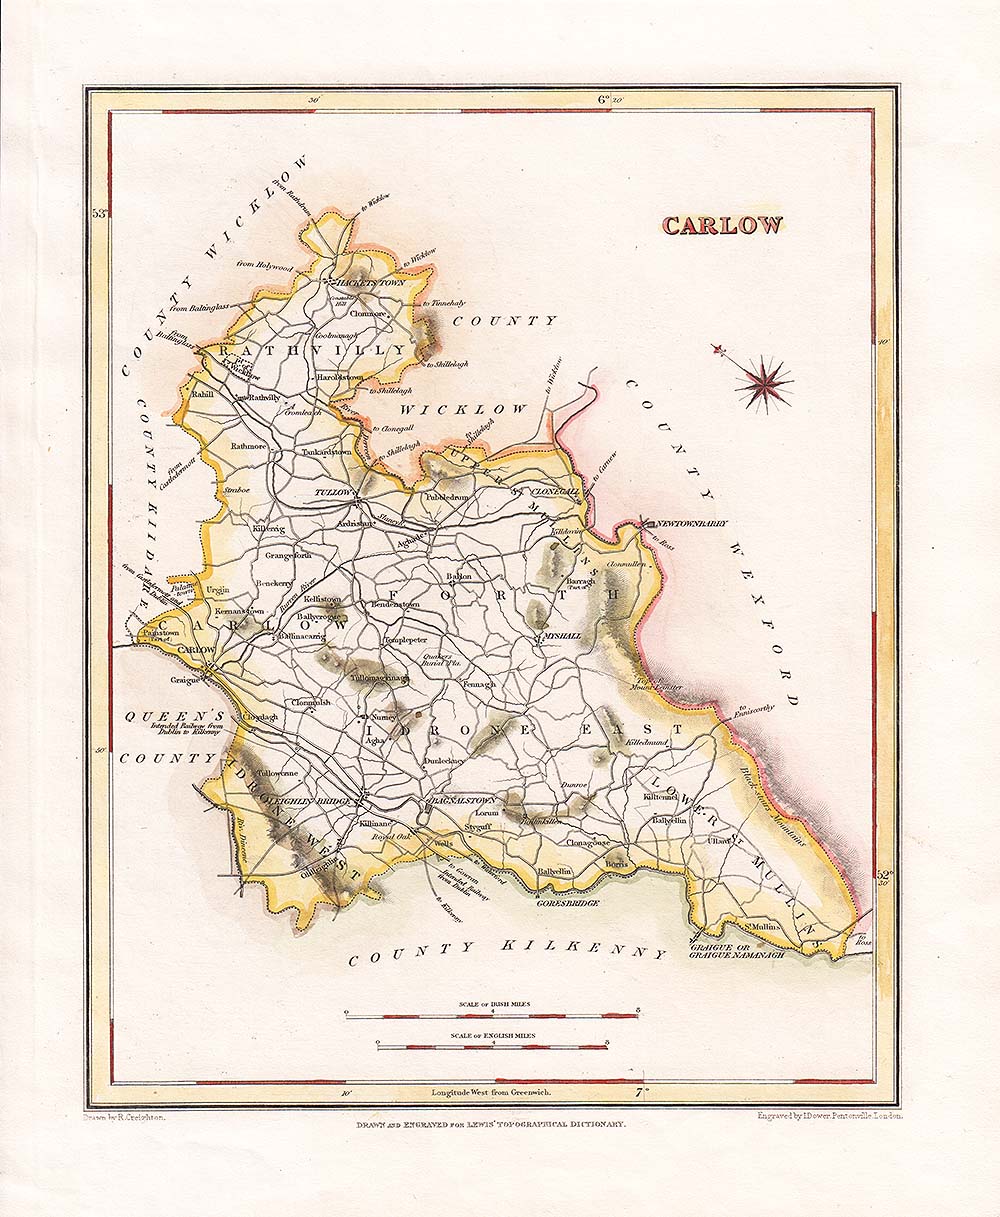 Carlow  -  Lewis Atlas comprising the Counties of Ireland